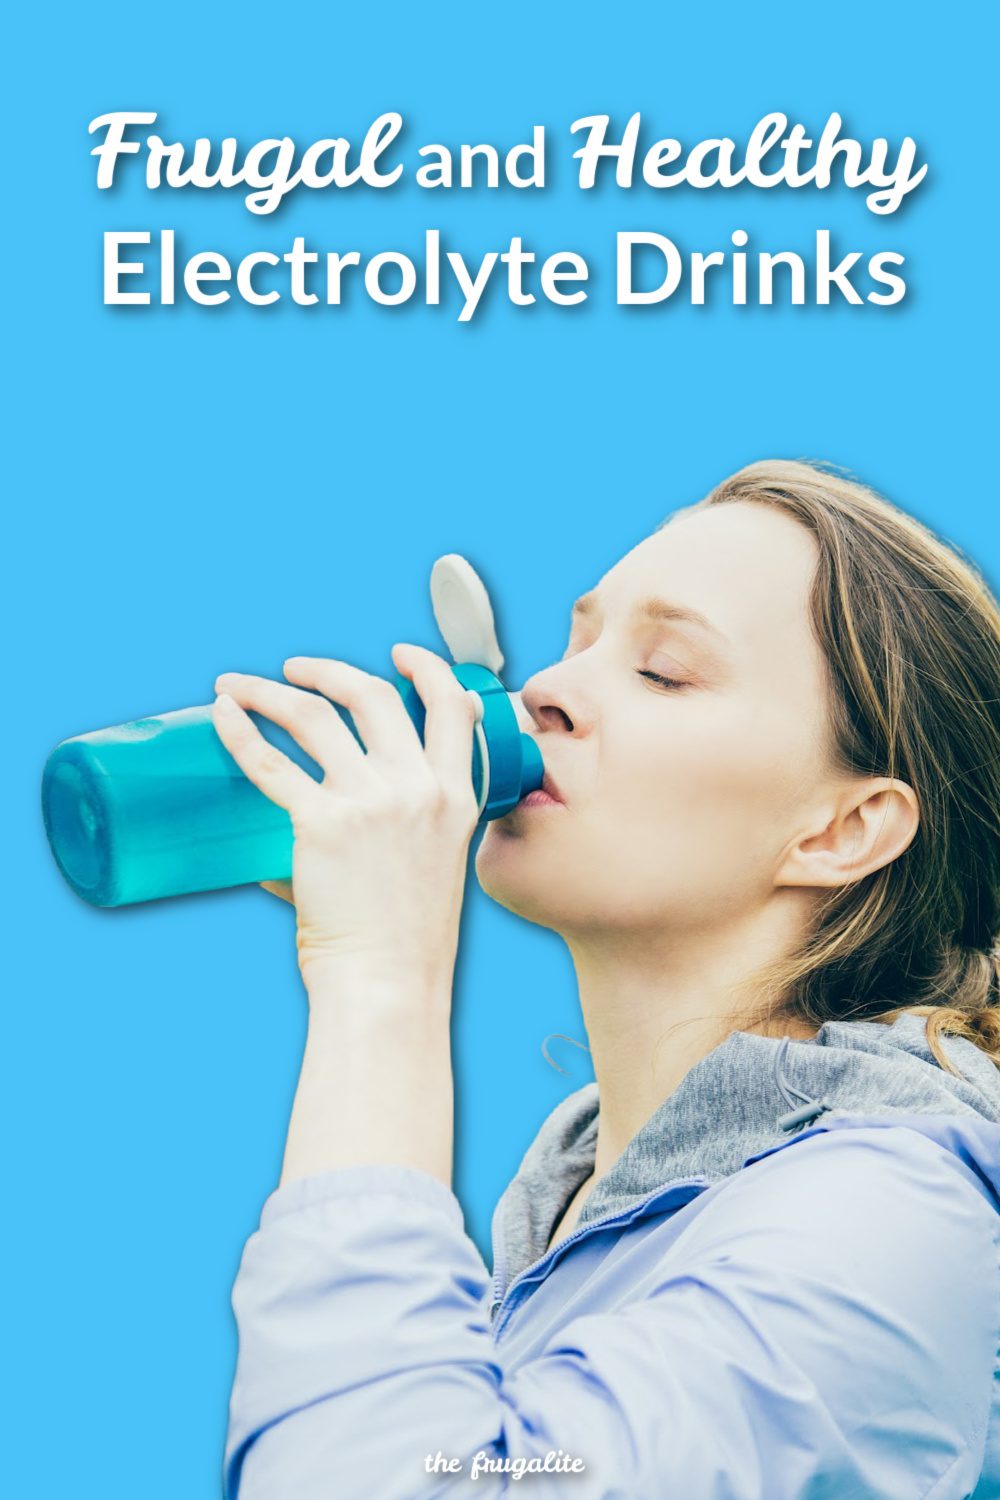 Frugal and Healthy Electrolyte Drinks